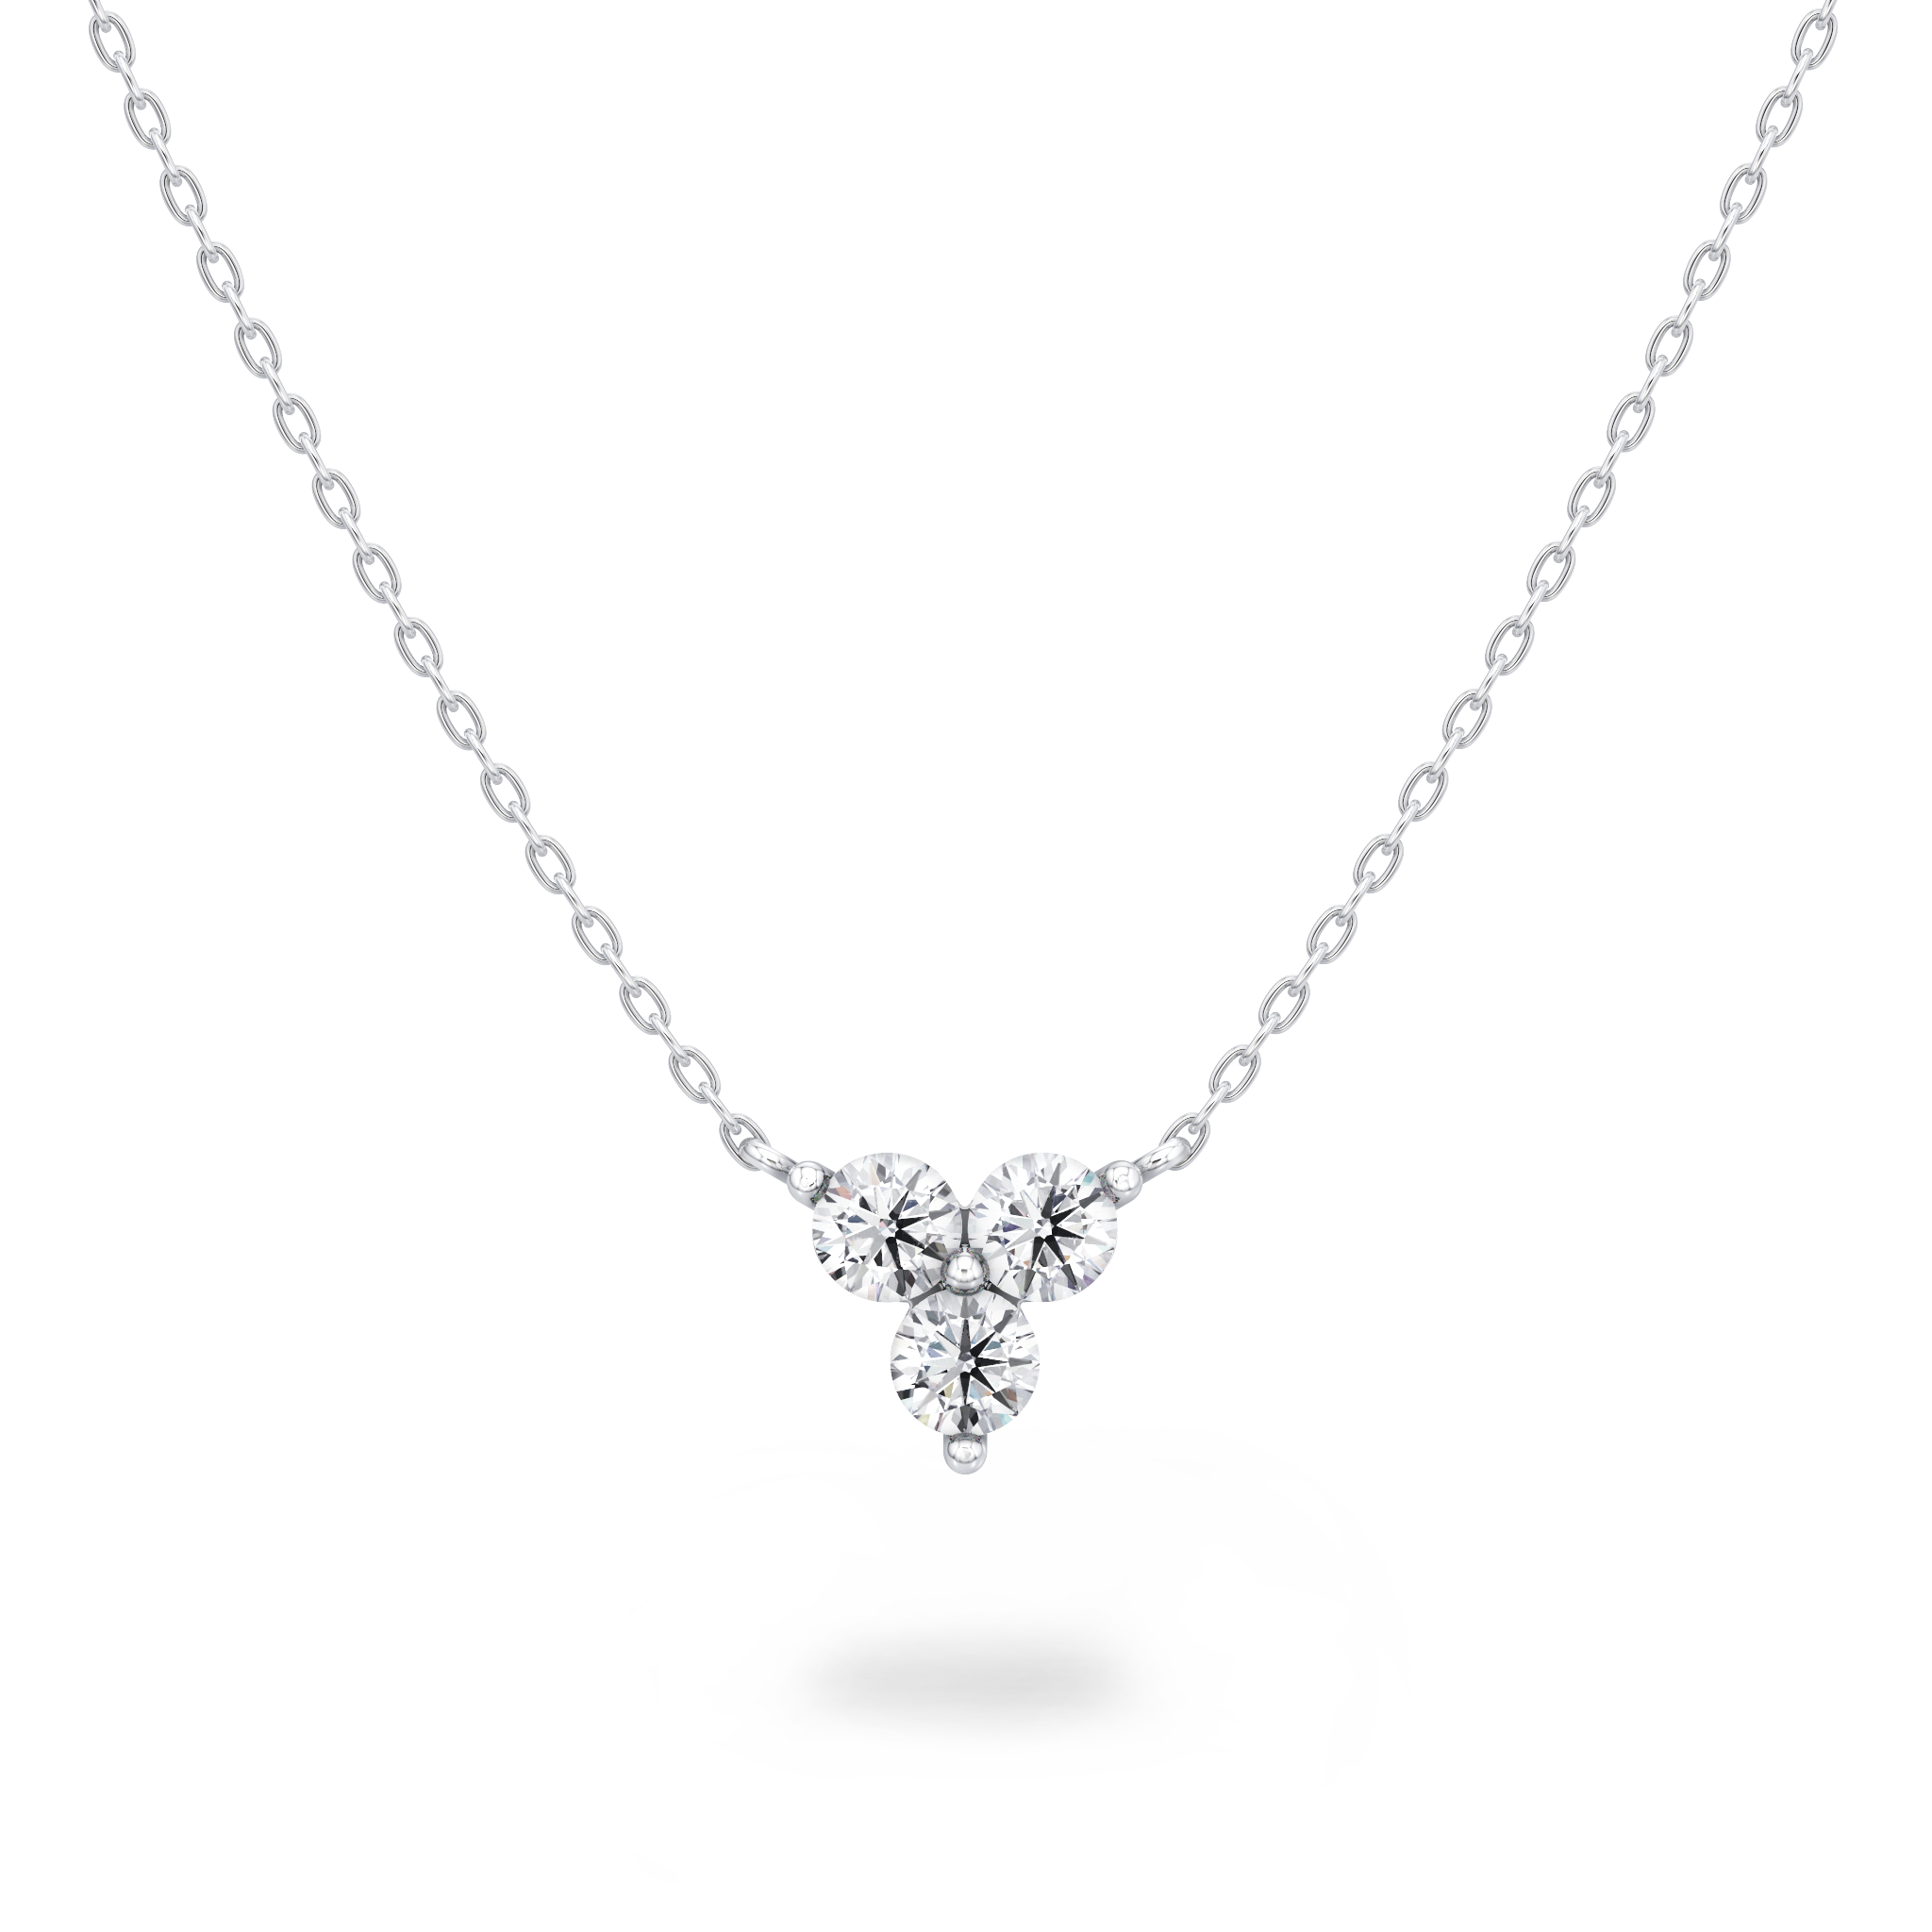 Shimansky - Clover Diamond Necklace crafted in 14K White Gold